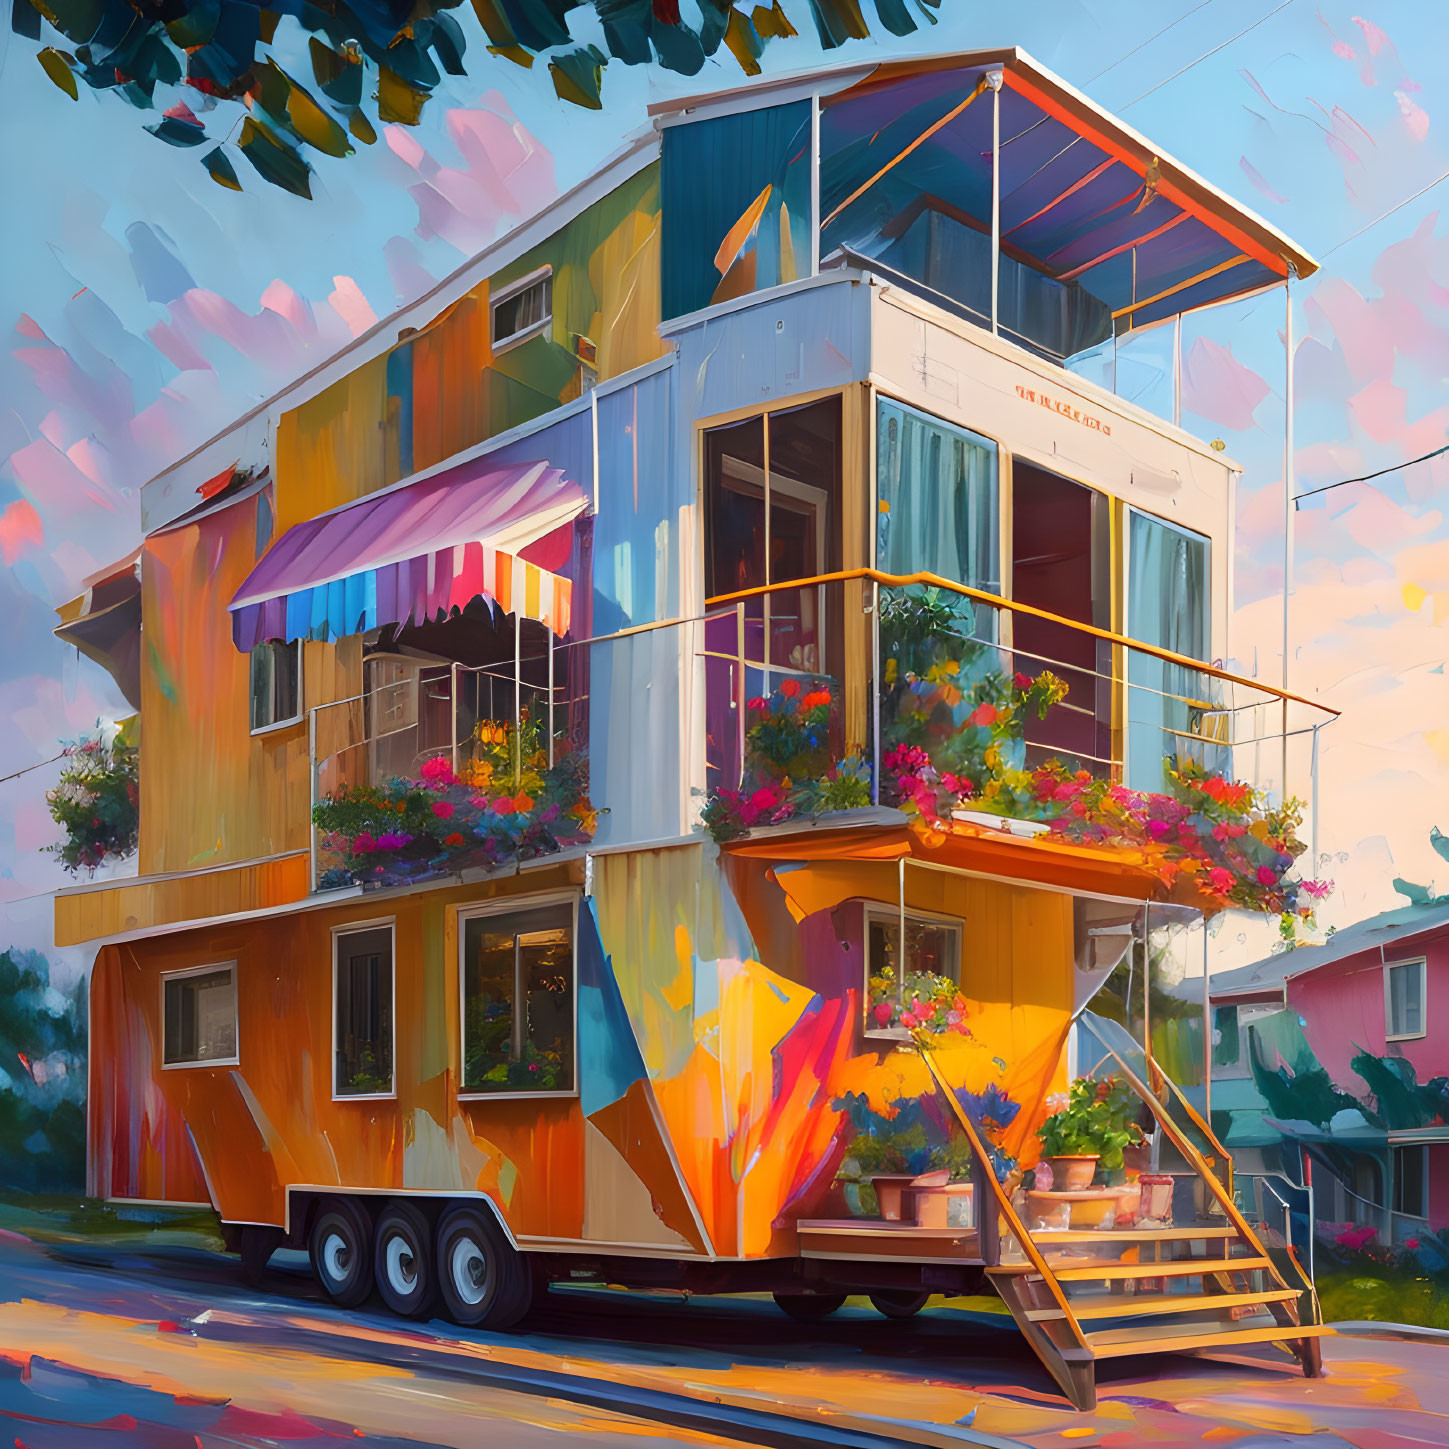 Vibrant two-story mobile home with balcony and floral decorations under sunny sky